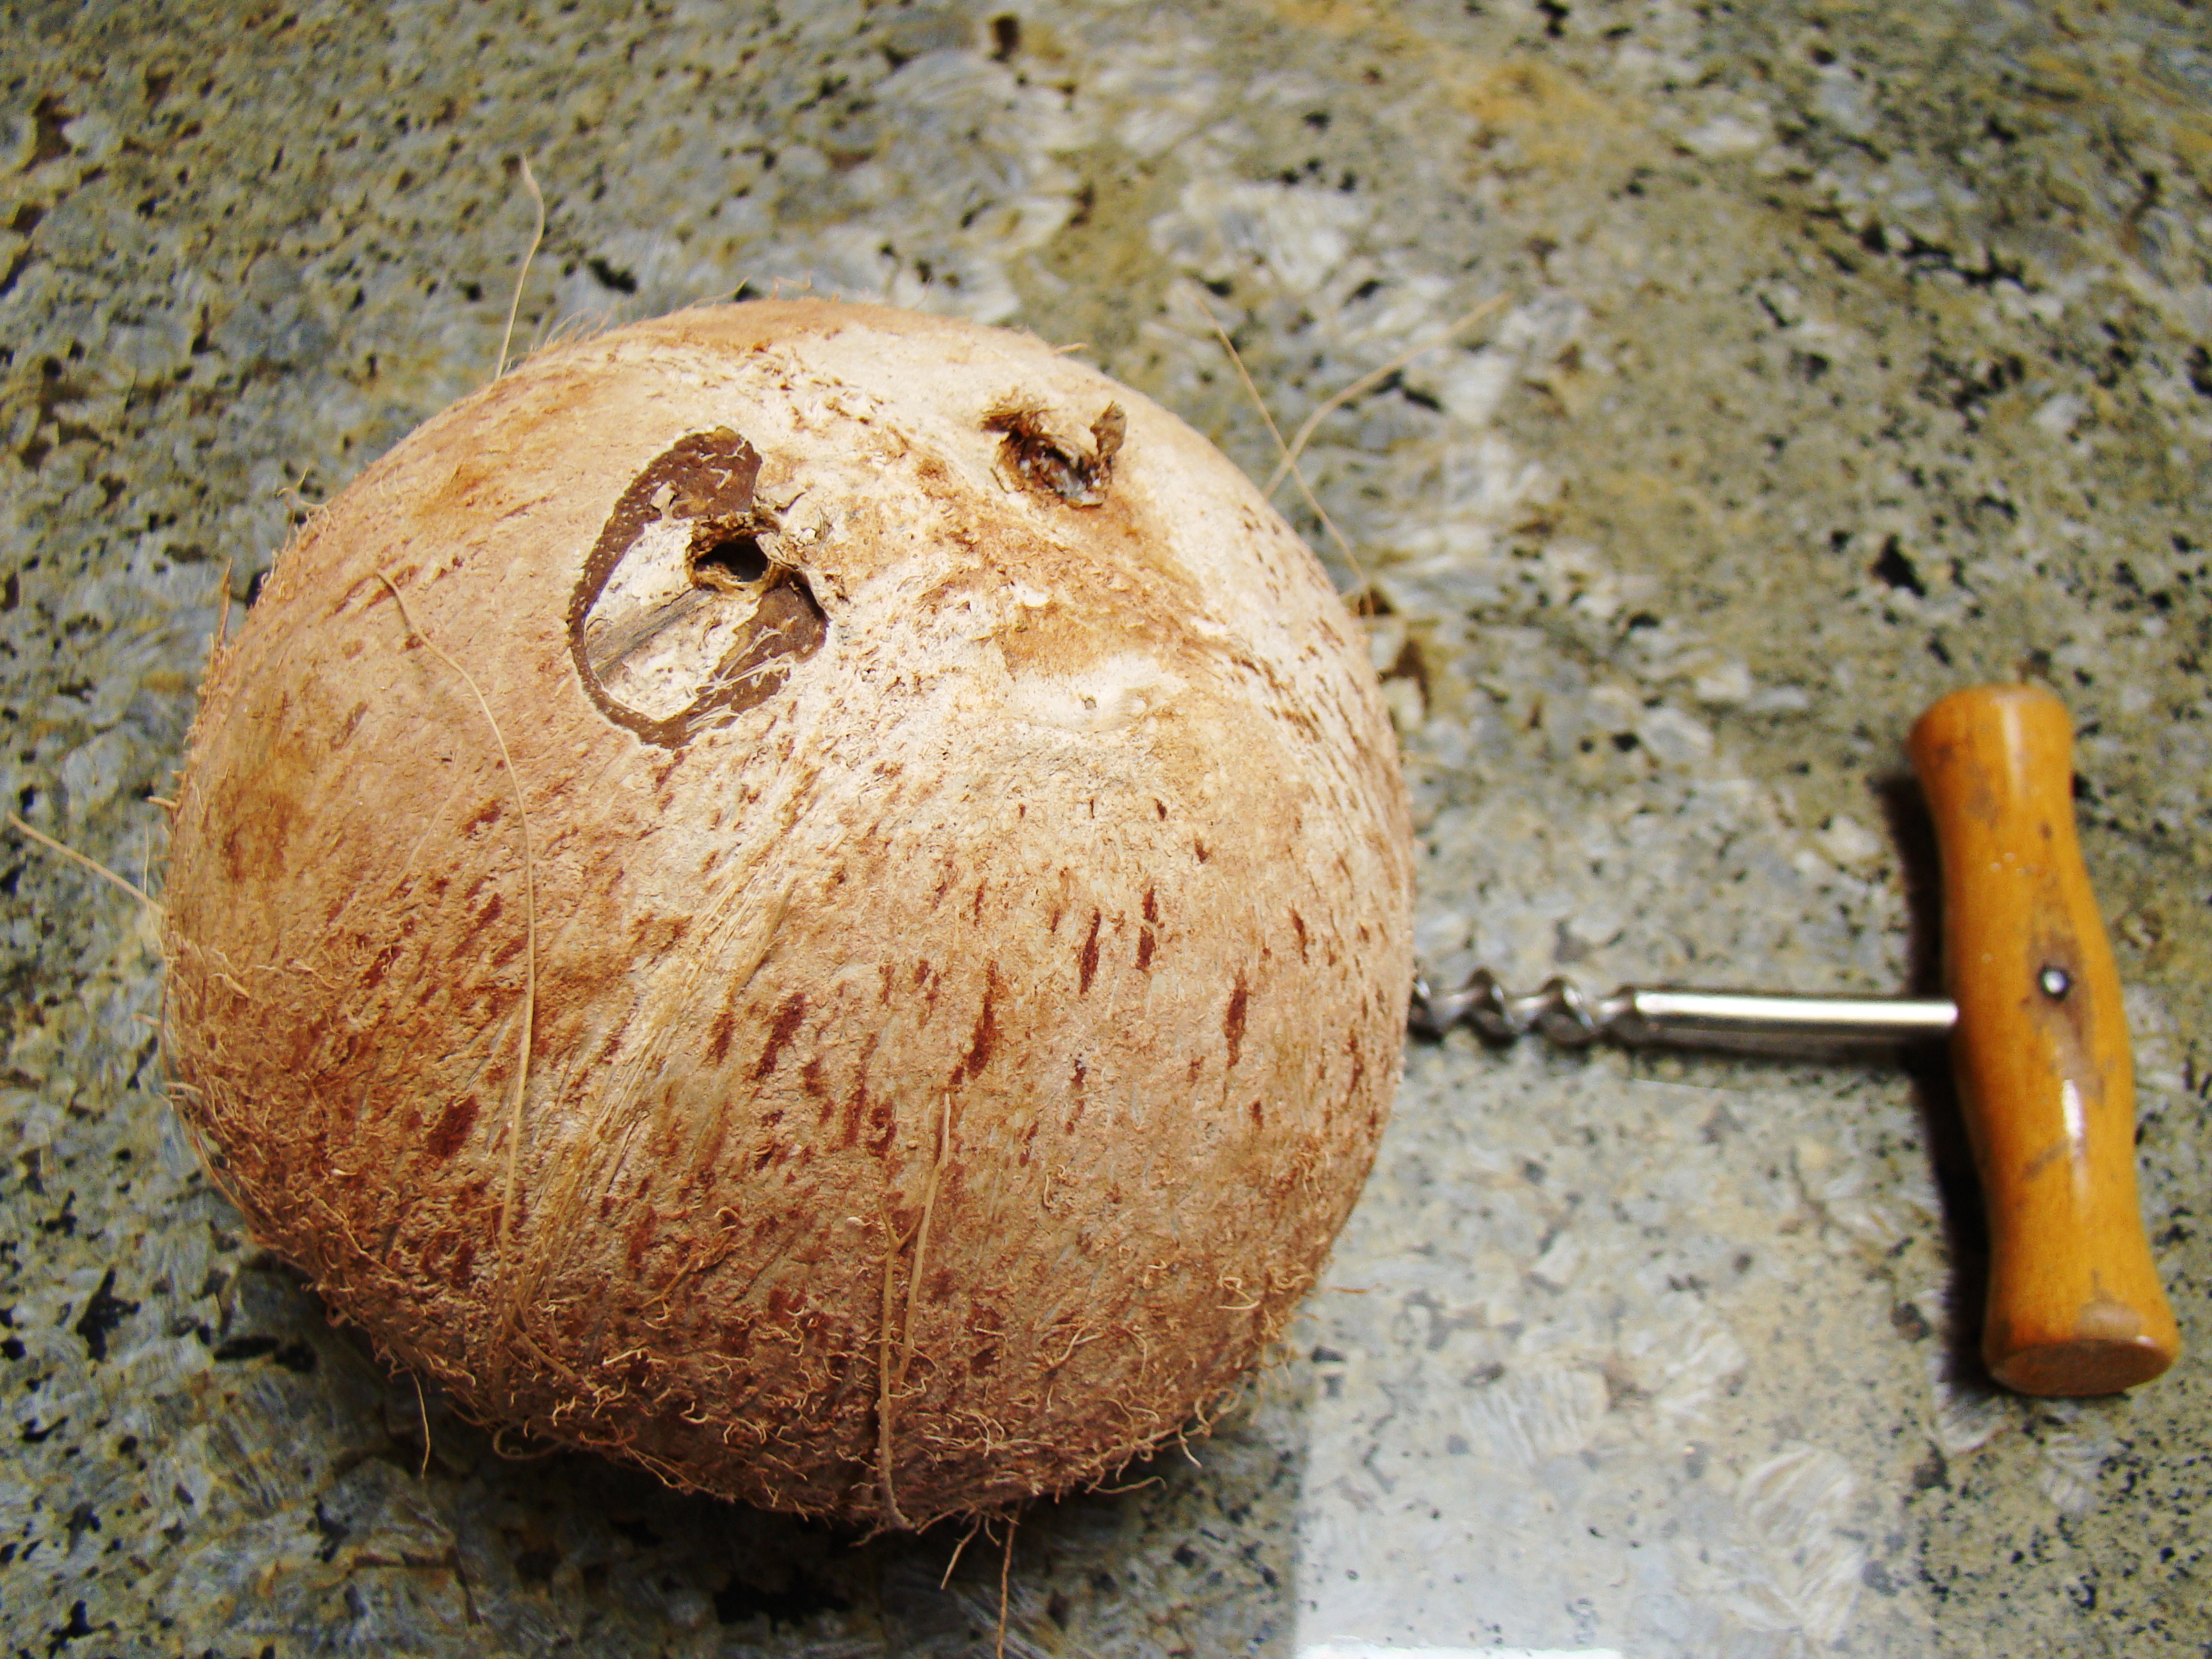 Coconut, Holes to Drain Water (4492296298)